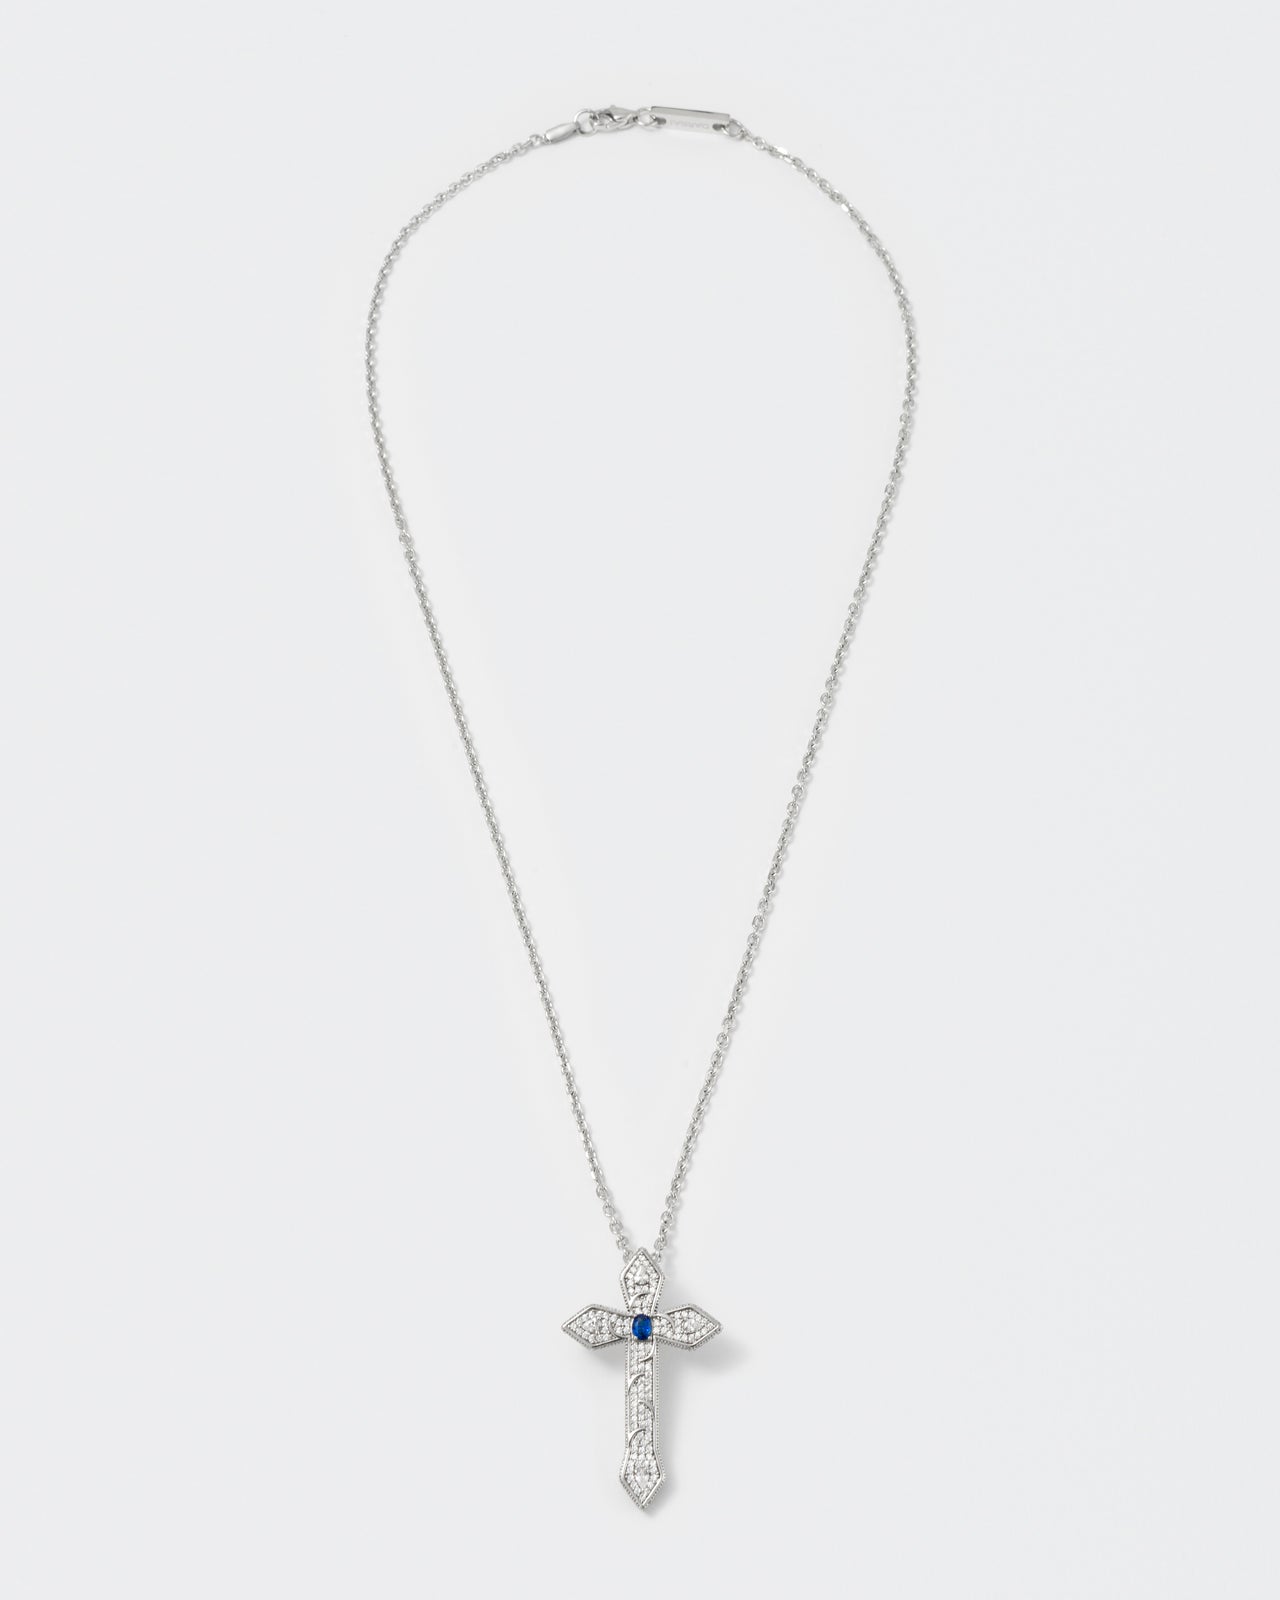 gothic cross pendant necklace with 18kt white gold coating, drop and oval shaped stones in diamond white and sapphire blue with metal gothic detailing. Hand-set micropavé on front and sides